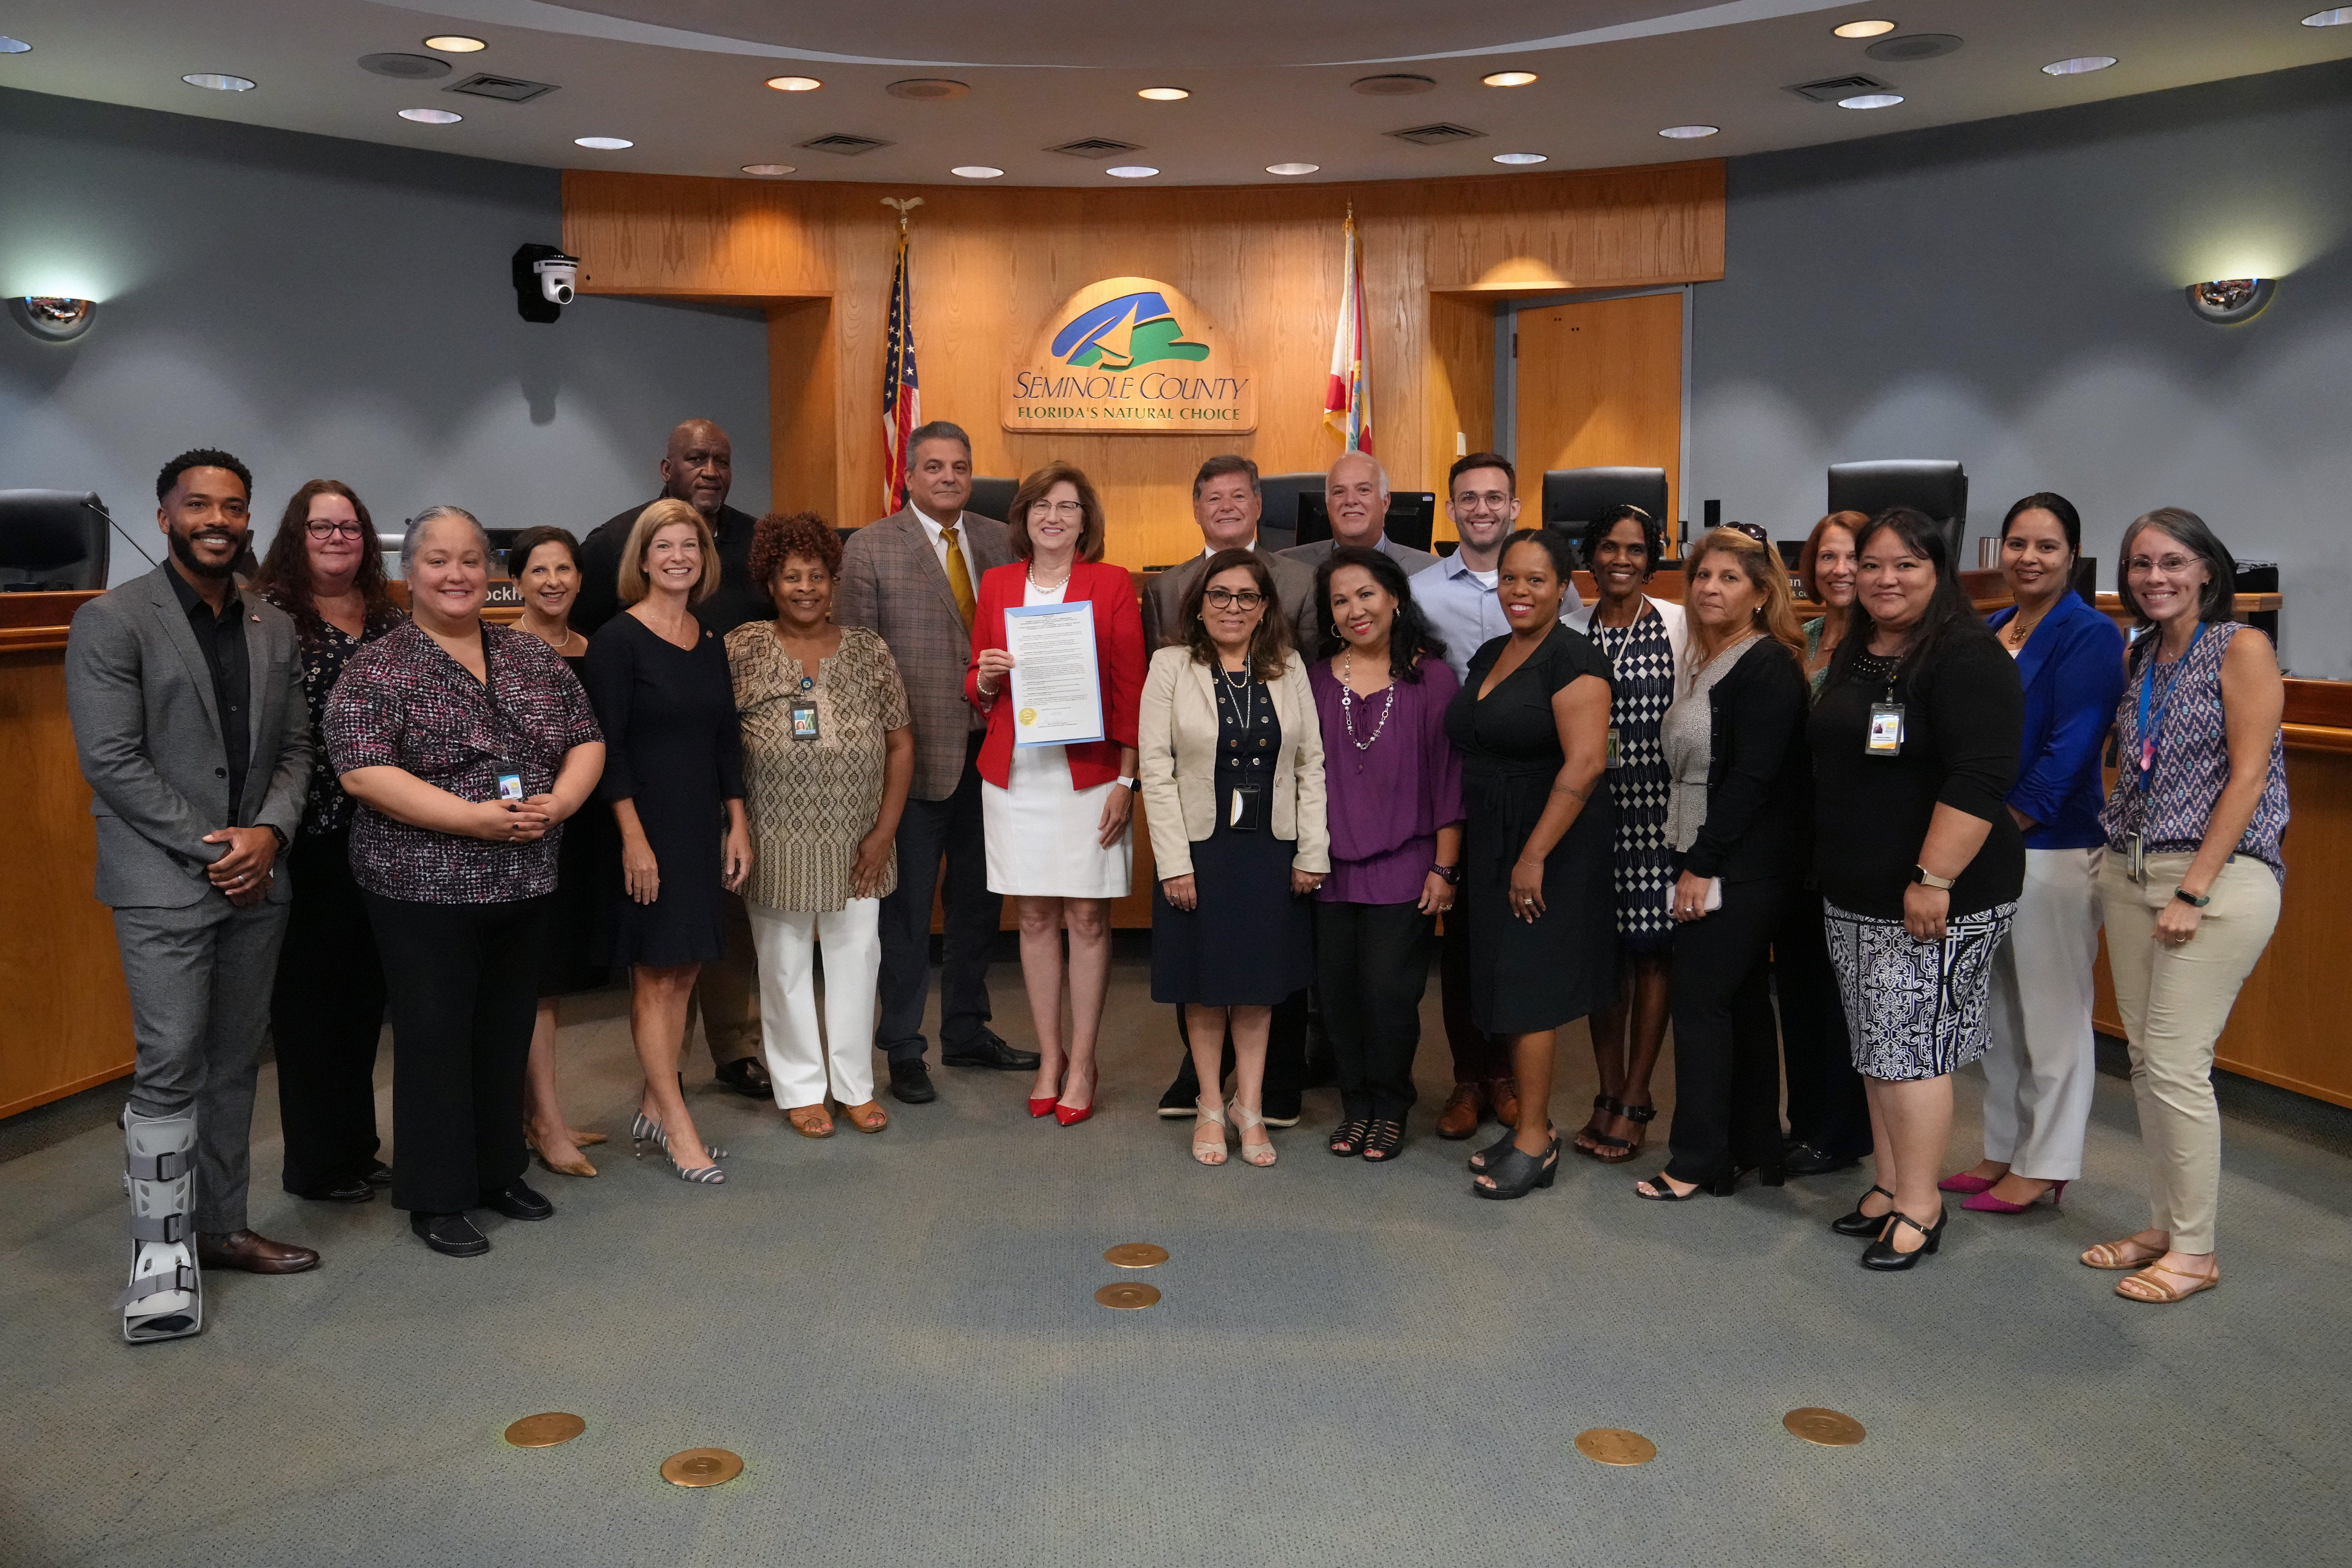 Resolution - Recognizing Donna Walsh, Director of the  Seminole County Health Department for more than 18 years of  service to Seminole County Government and its Citizens